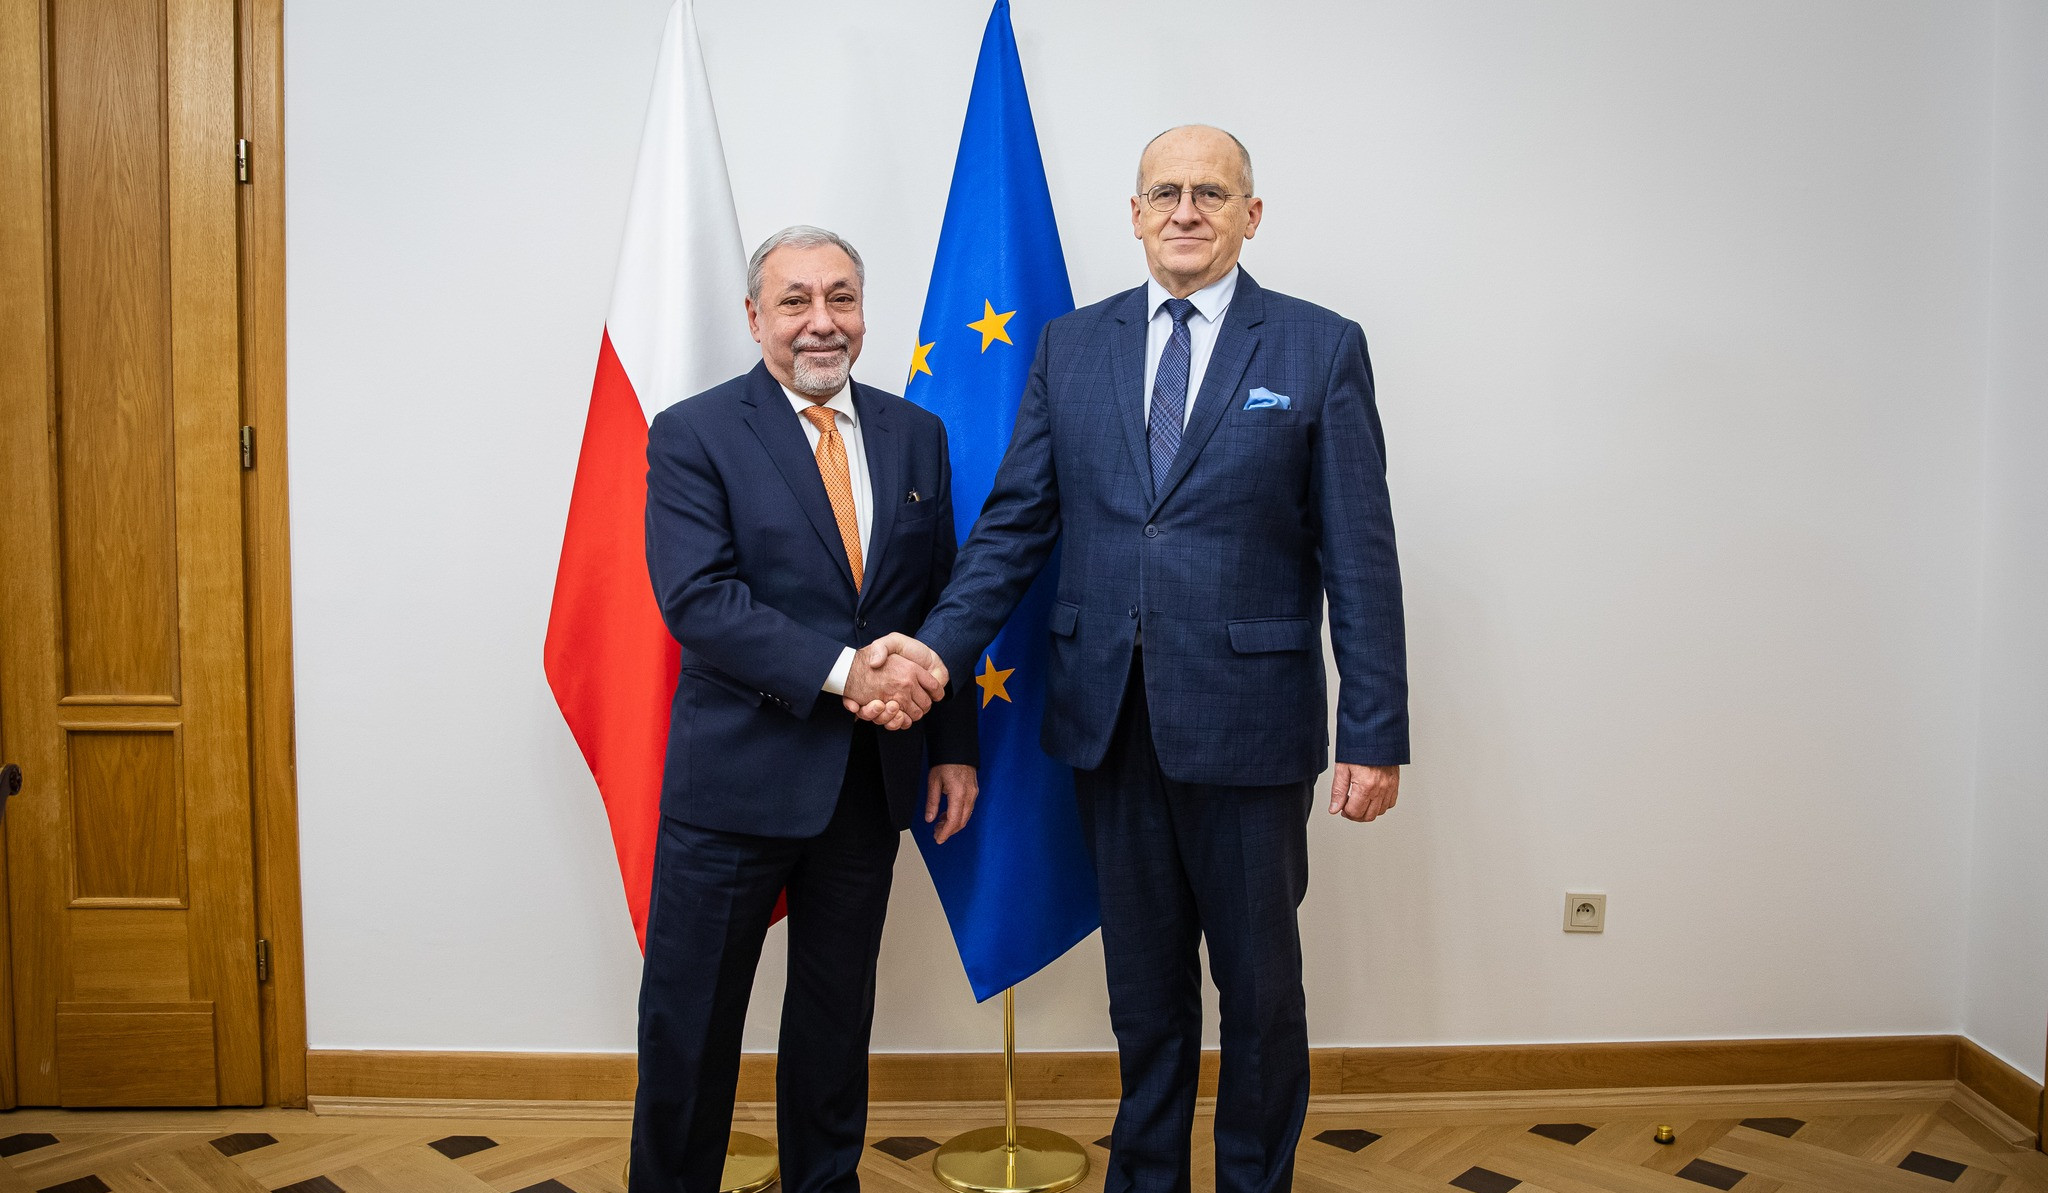 Ambassador Arzumanyan and Polish Foreign Minister referred to recent developments in regional security